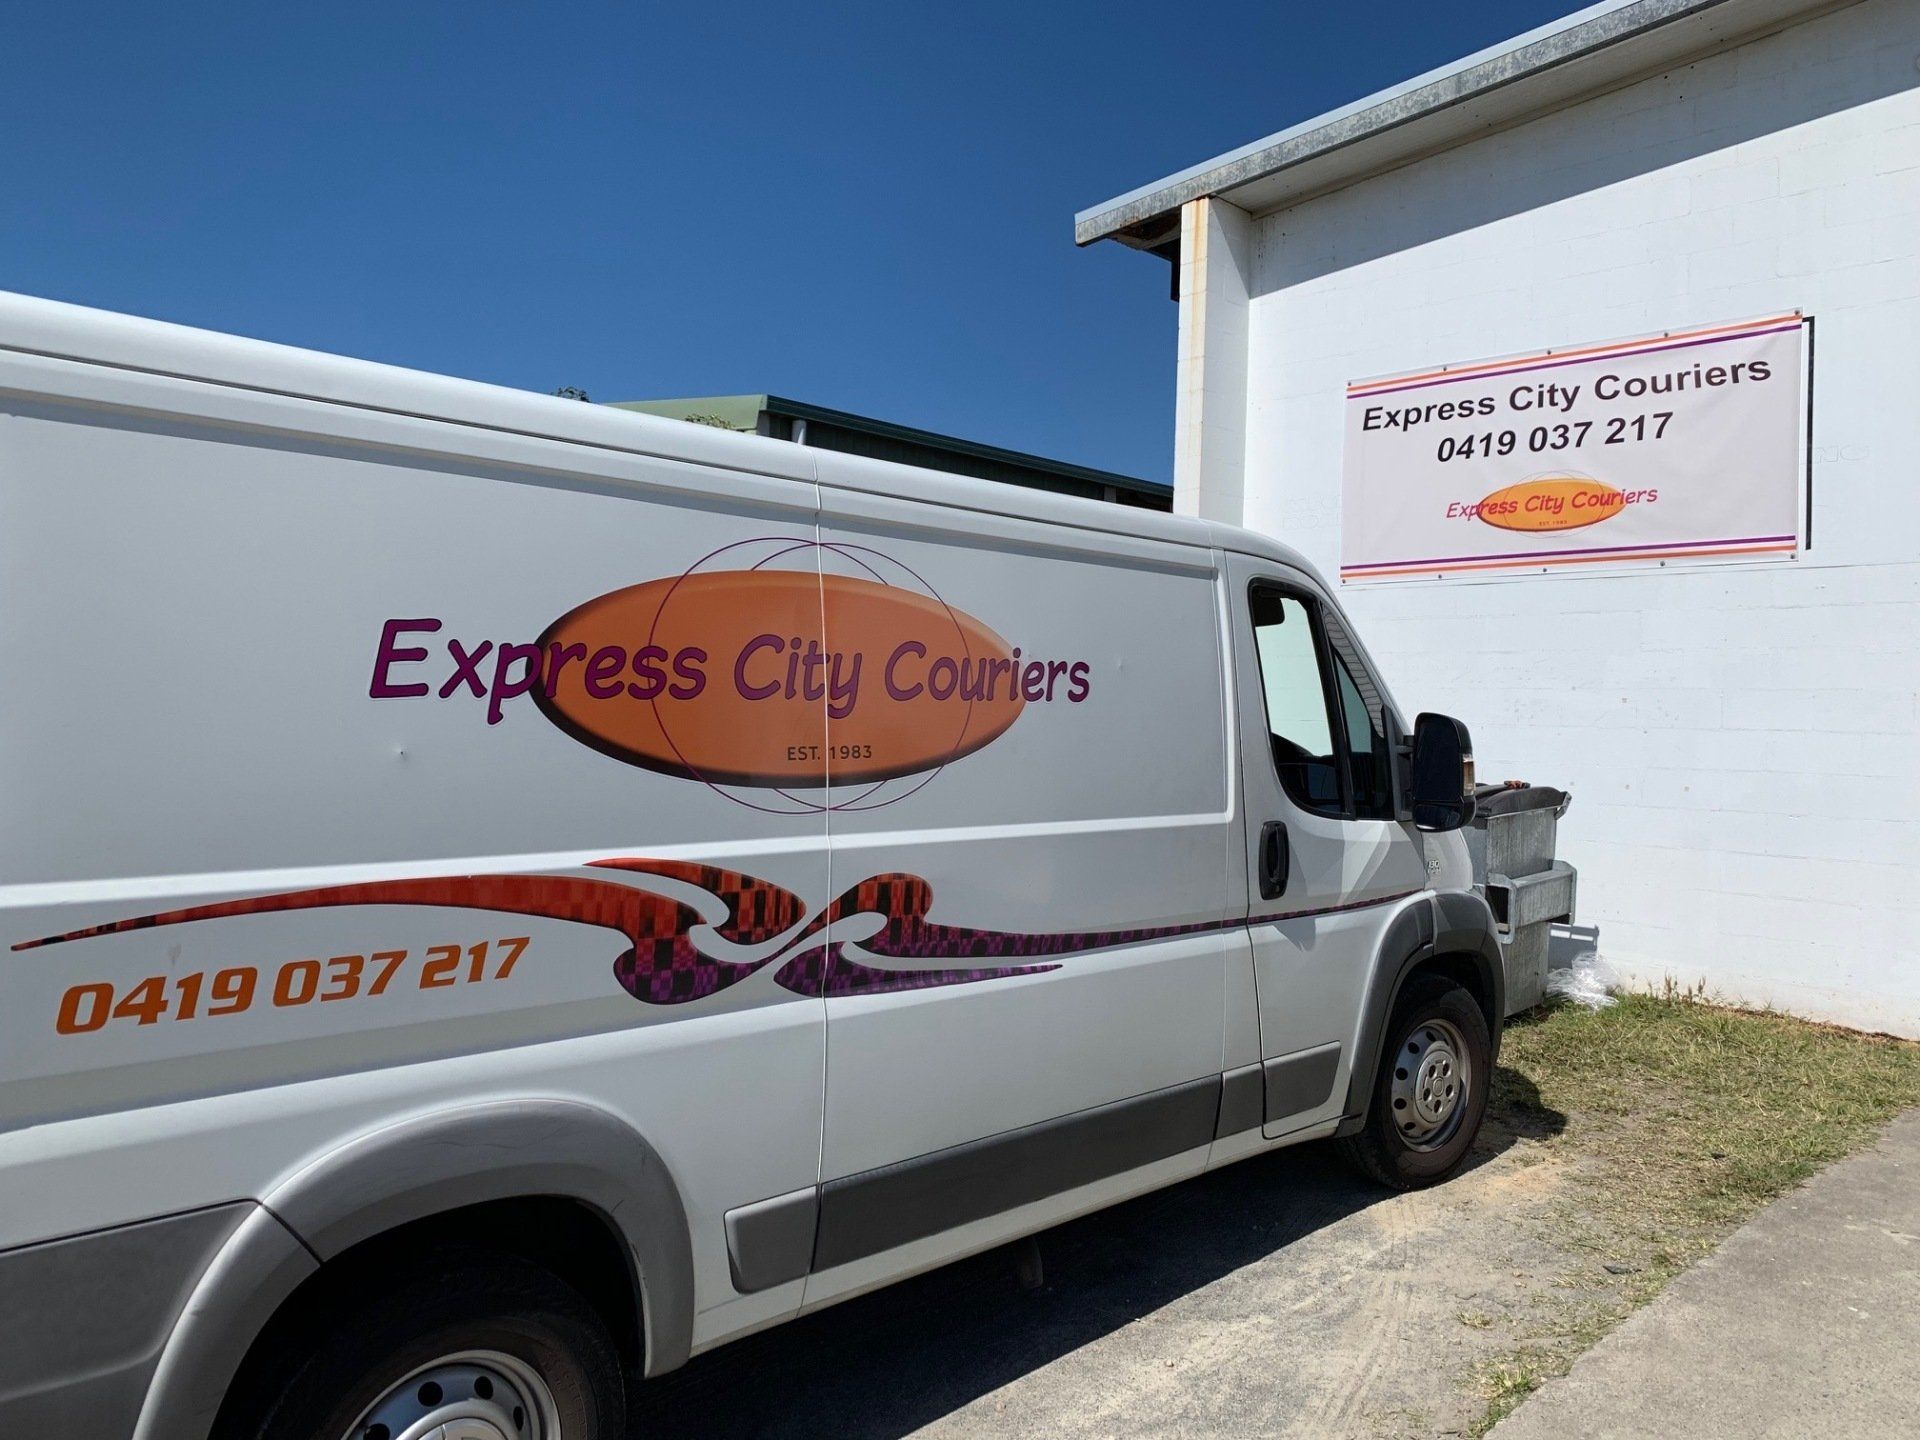 expert courier in Cairns